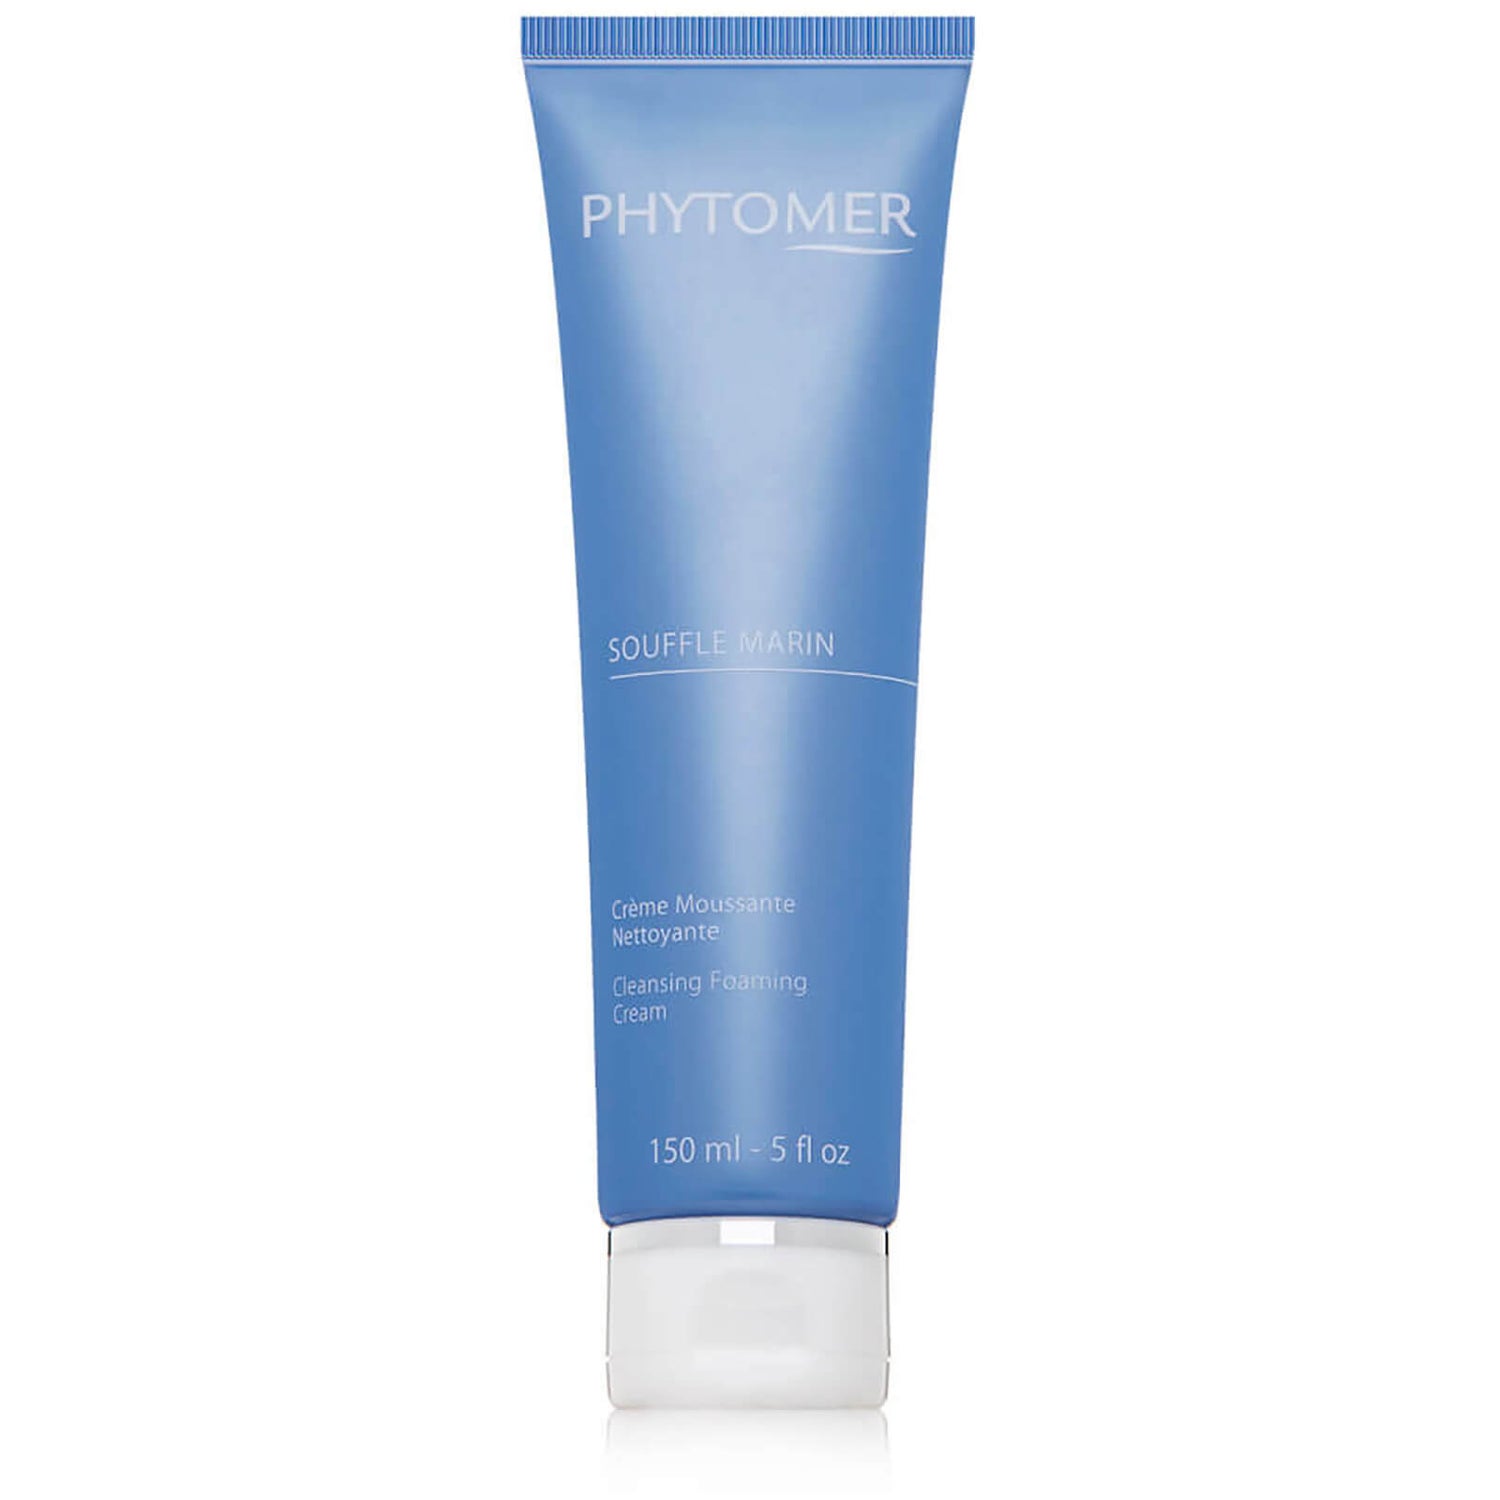 Phytomer Souffle Marin Cleansing Foaming Cream （150ml）